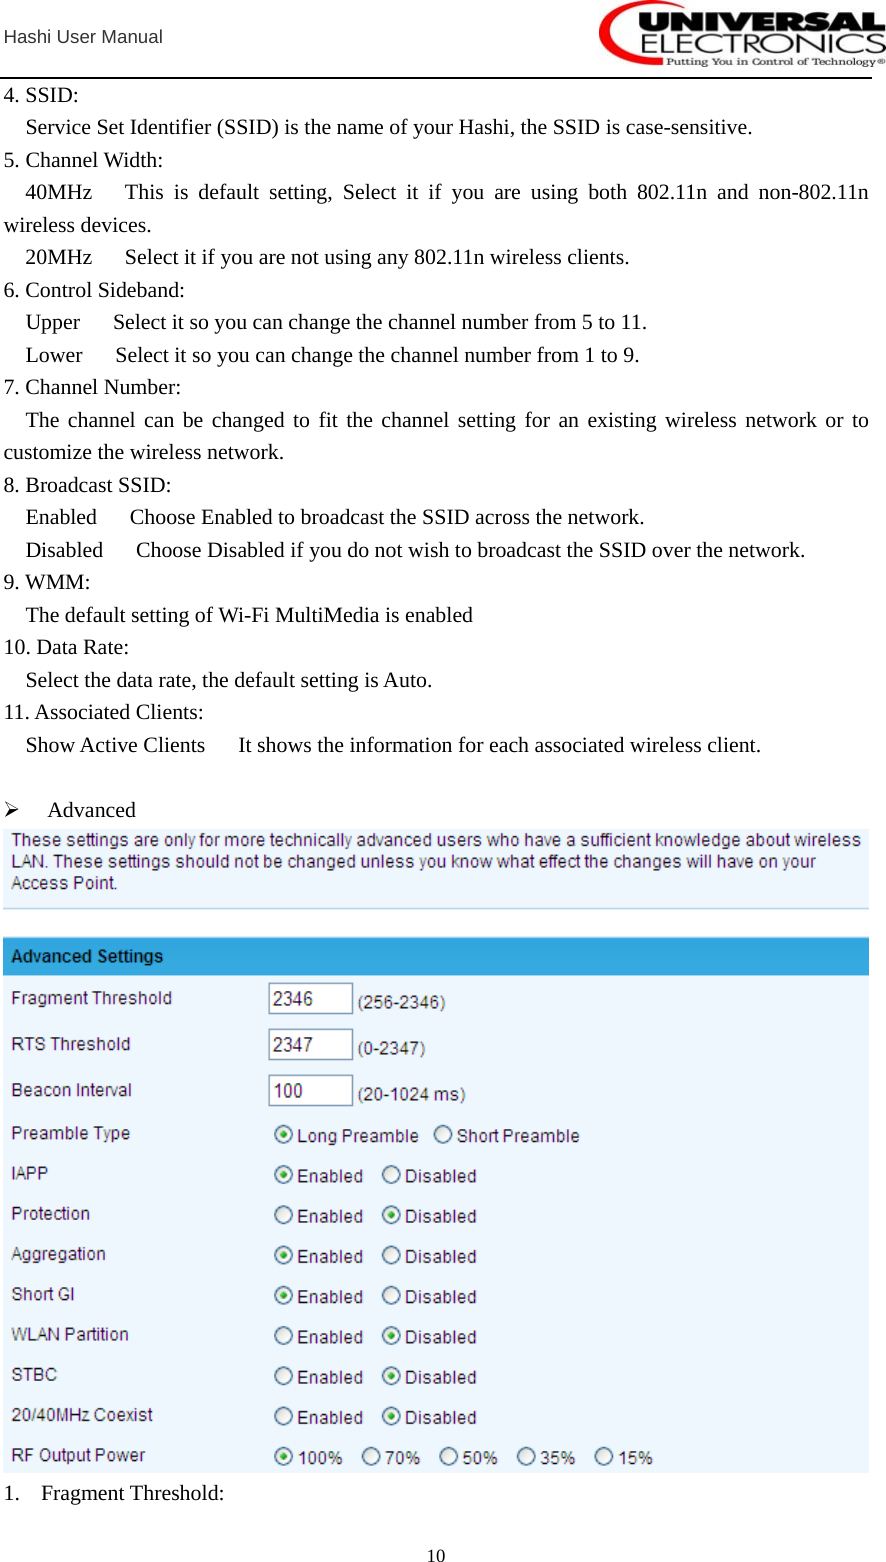  Hashi User Manual  104. SSID:     Service Set Identifier (SSID) is the name of your Hashi, the SSID is case-sensitive. 5. Channel Width:   40MHz   This is default setting, Select it if you are using both 802.11n and non-802.11n wireless devices.     20MHz      Select it if you are not using any 802.11n wireless clients. 6. Control Sideband:   Upper   Select it so you can change the channel number from 5 to 11.   Lower   Select it so you can change the channel number from 1 to 9. 7. Channel Number:   The channel can be changed to fit the channel setting for an existing wireless network or to customize the wireless network. 8. Broadcast SSID:     Enabled      Choose Enabled to broadcast the SSID across the network.     Disabled      Choose Disabled if you do not wish to broadcast the SSID over the network. 9. WMM:     The default setting of Wi-Fi MultiMedia is enabled 10. Data Rate:     Select the data rate, the default setting is Auto. 11. Associated Clients:     Show Active Clients      It shows the information for each associated wireless client.  ¾ Advanced  1. Fragment Threshold: 